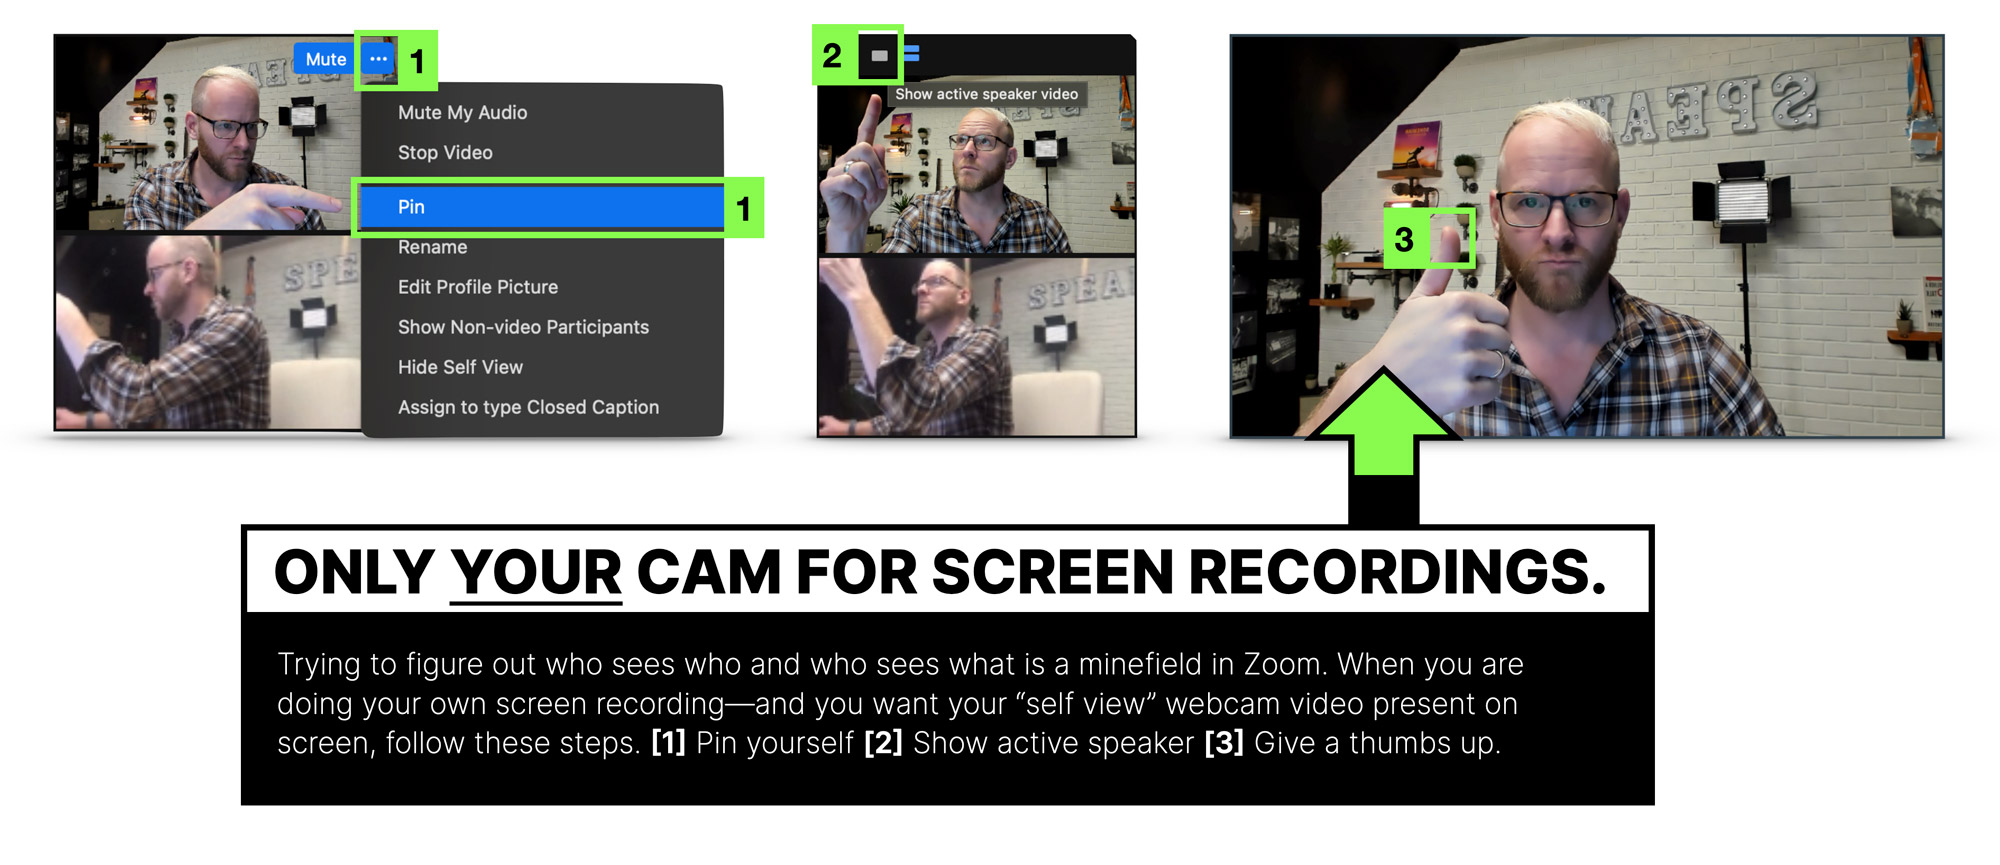 How to set up your self cam view in Zoom